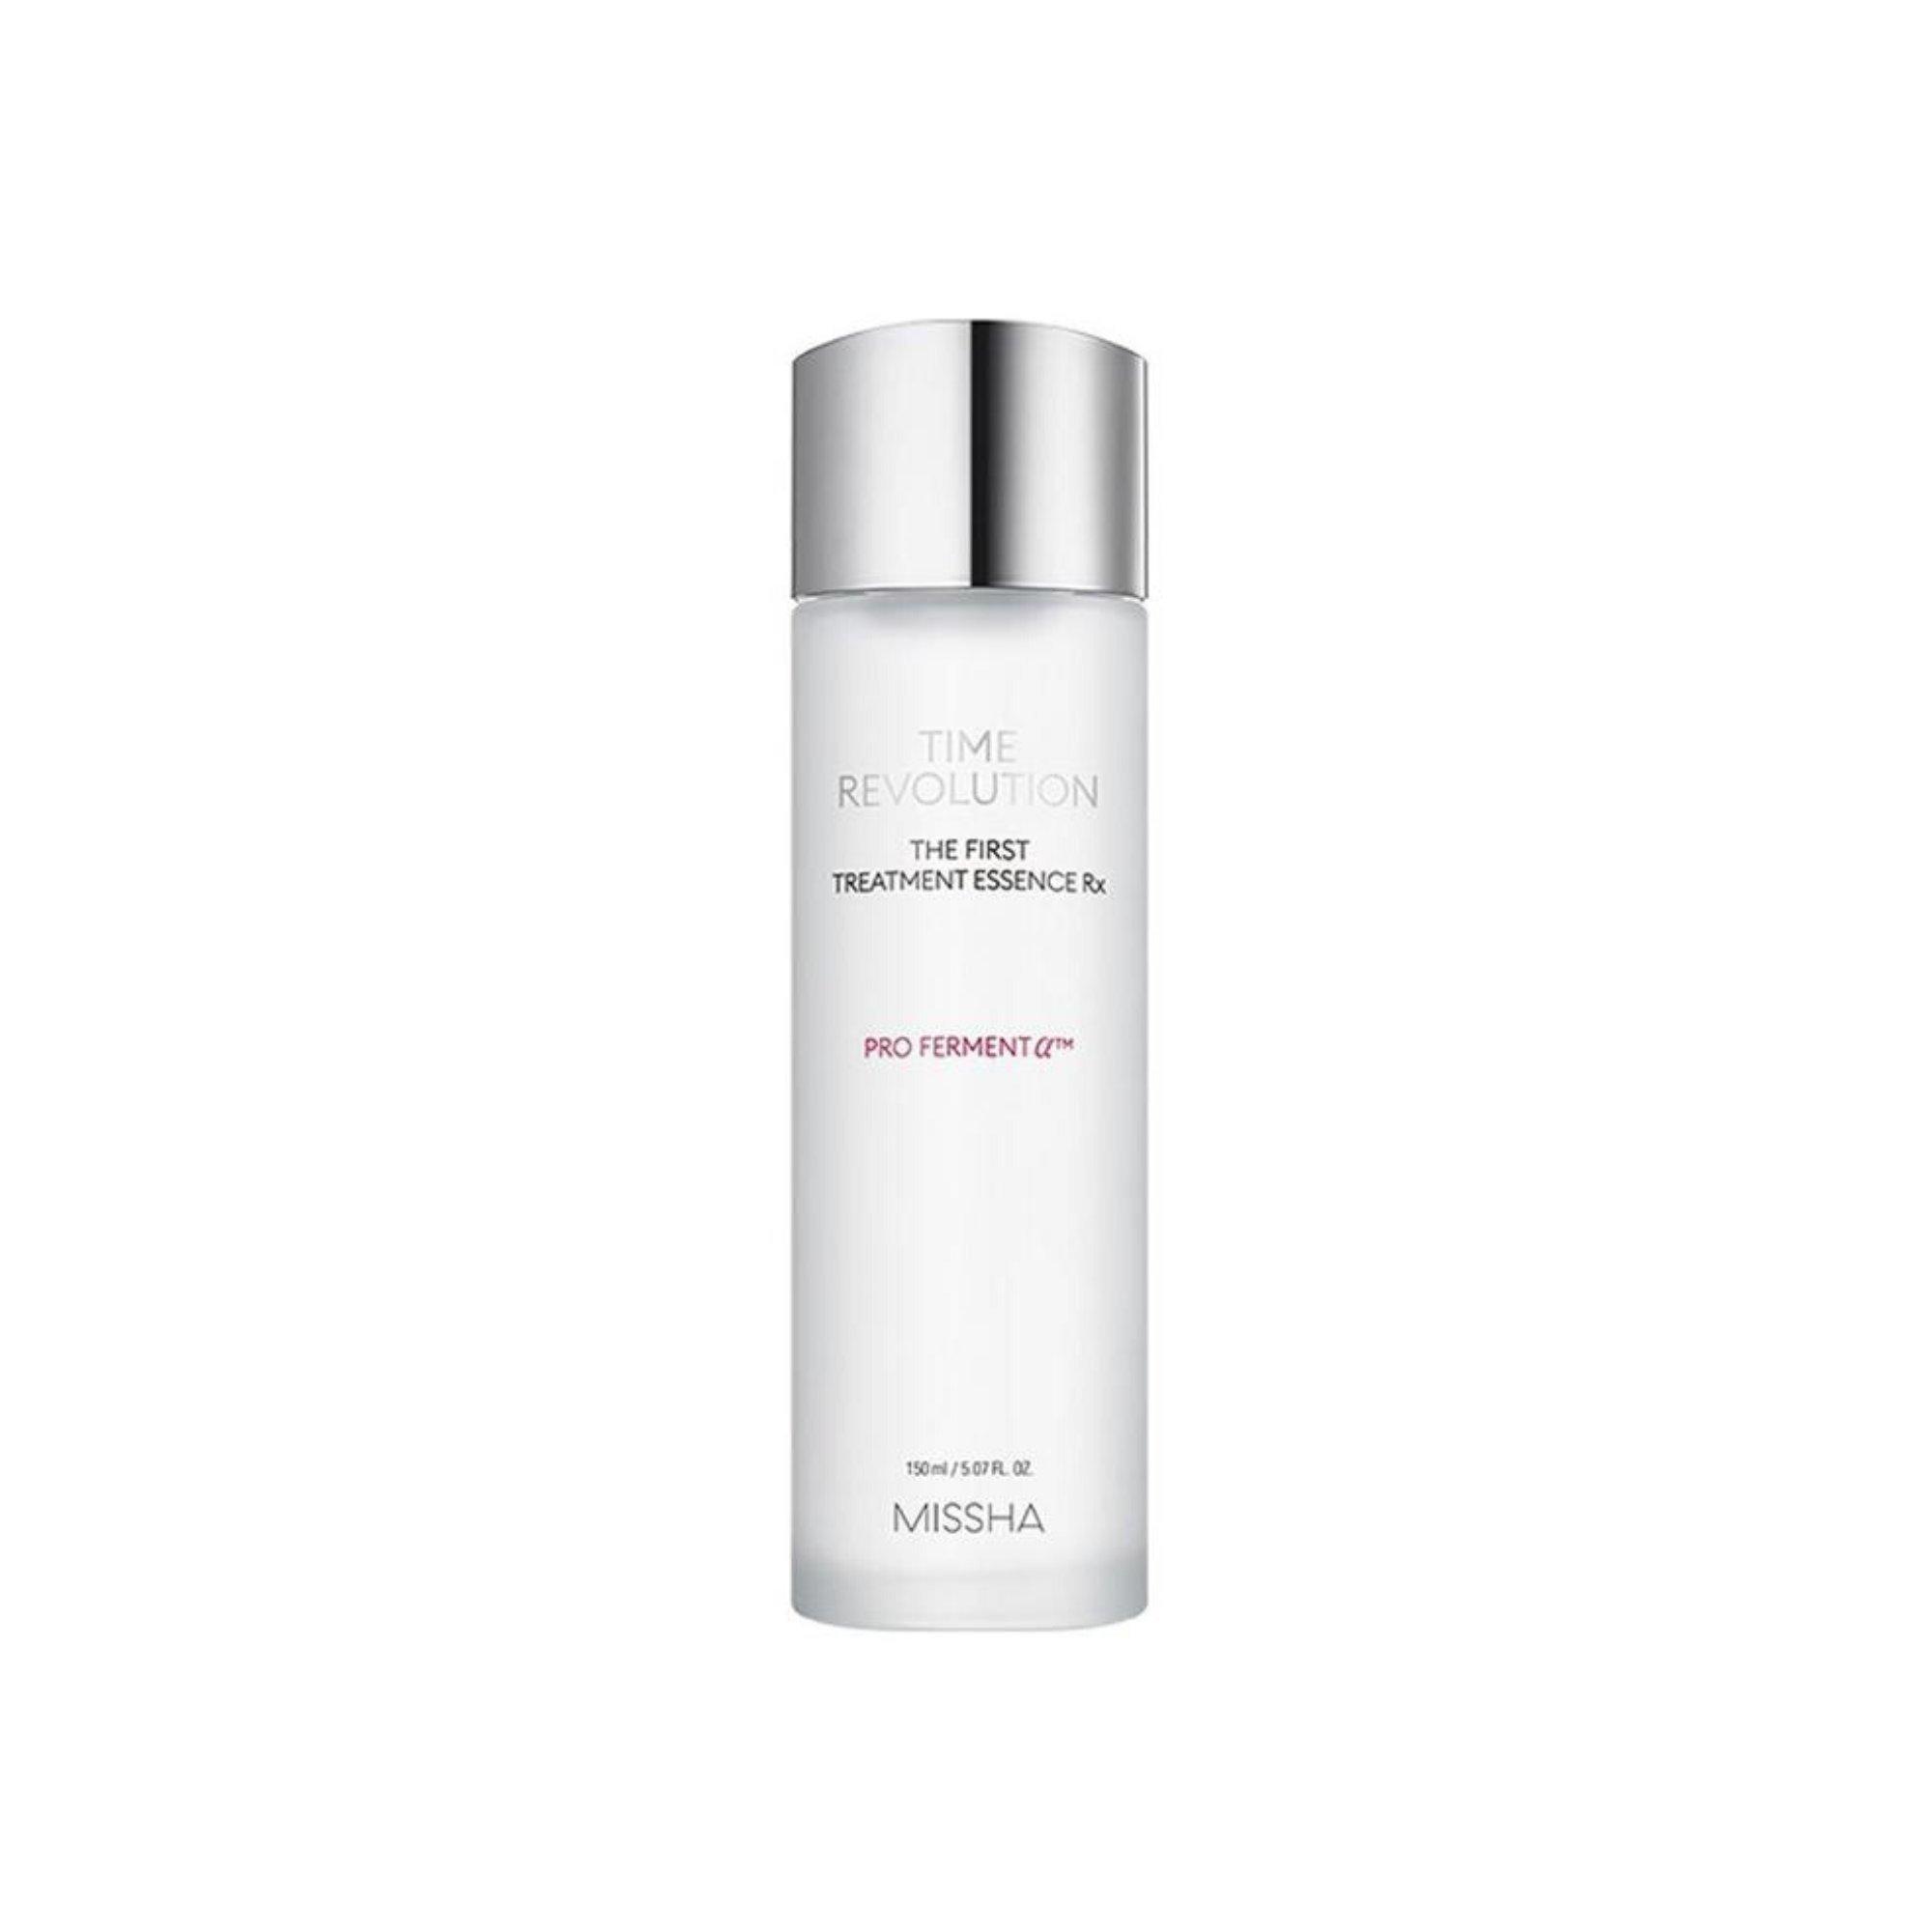 Image of Missha Time Revolution The First Treatment Essence RX (Pro FERMENT?) - 150 ml